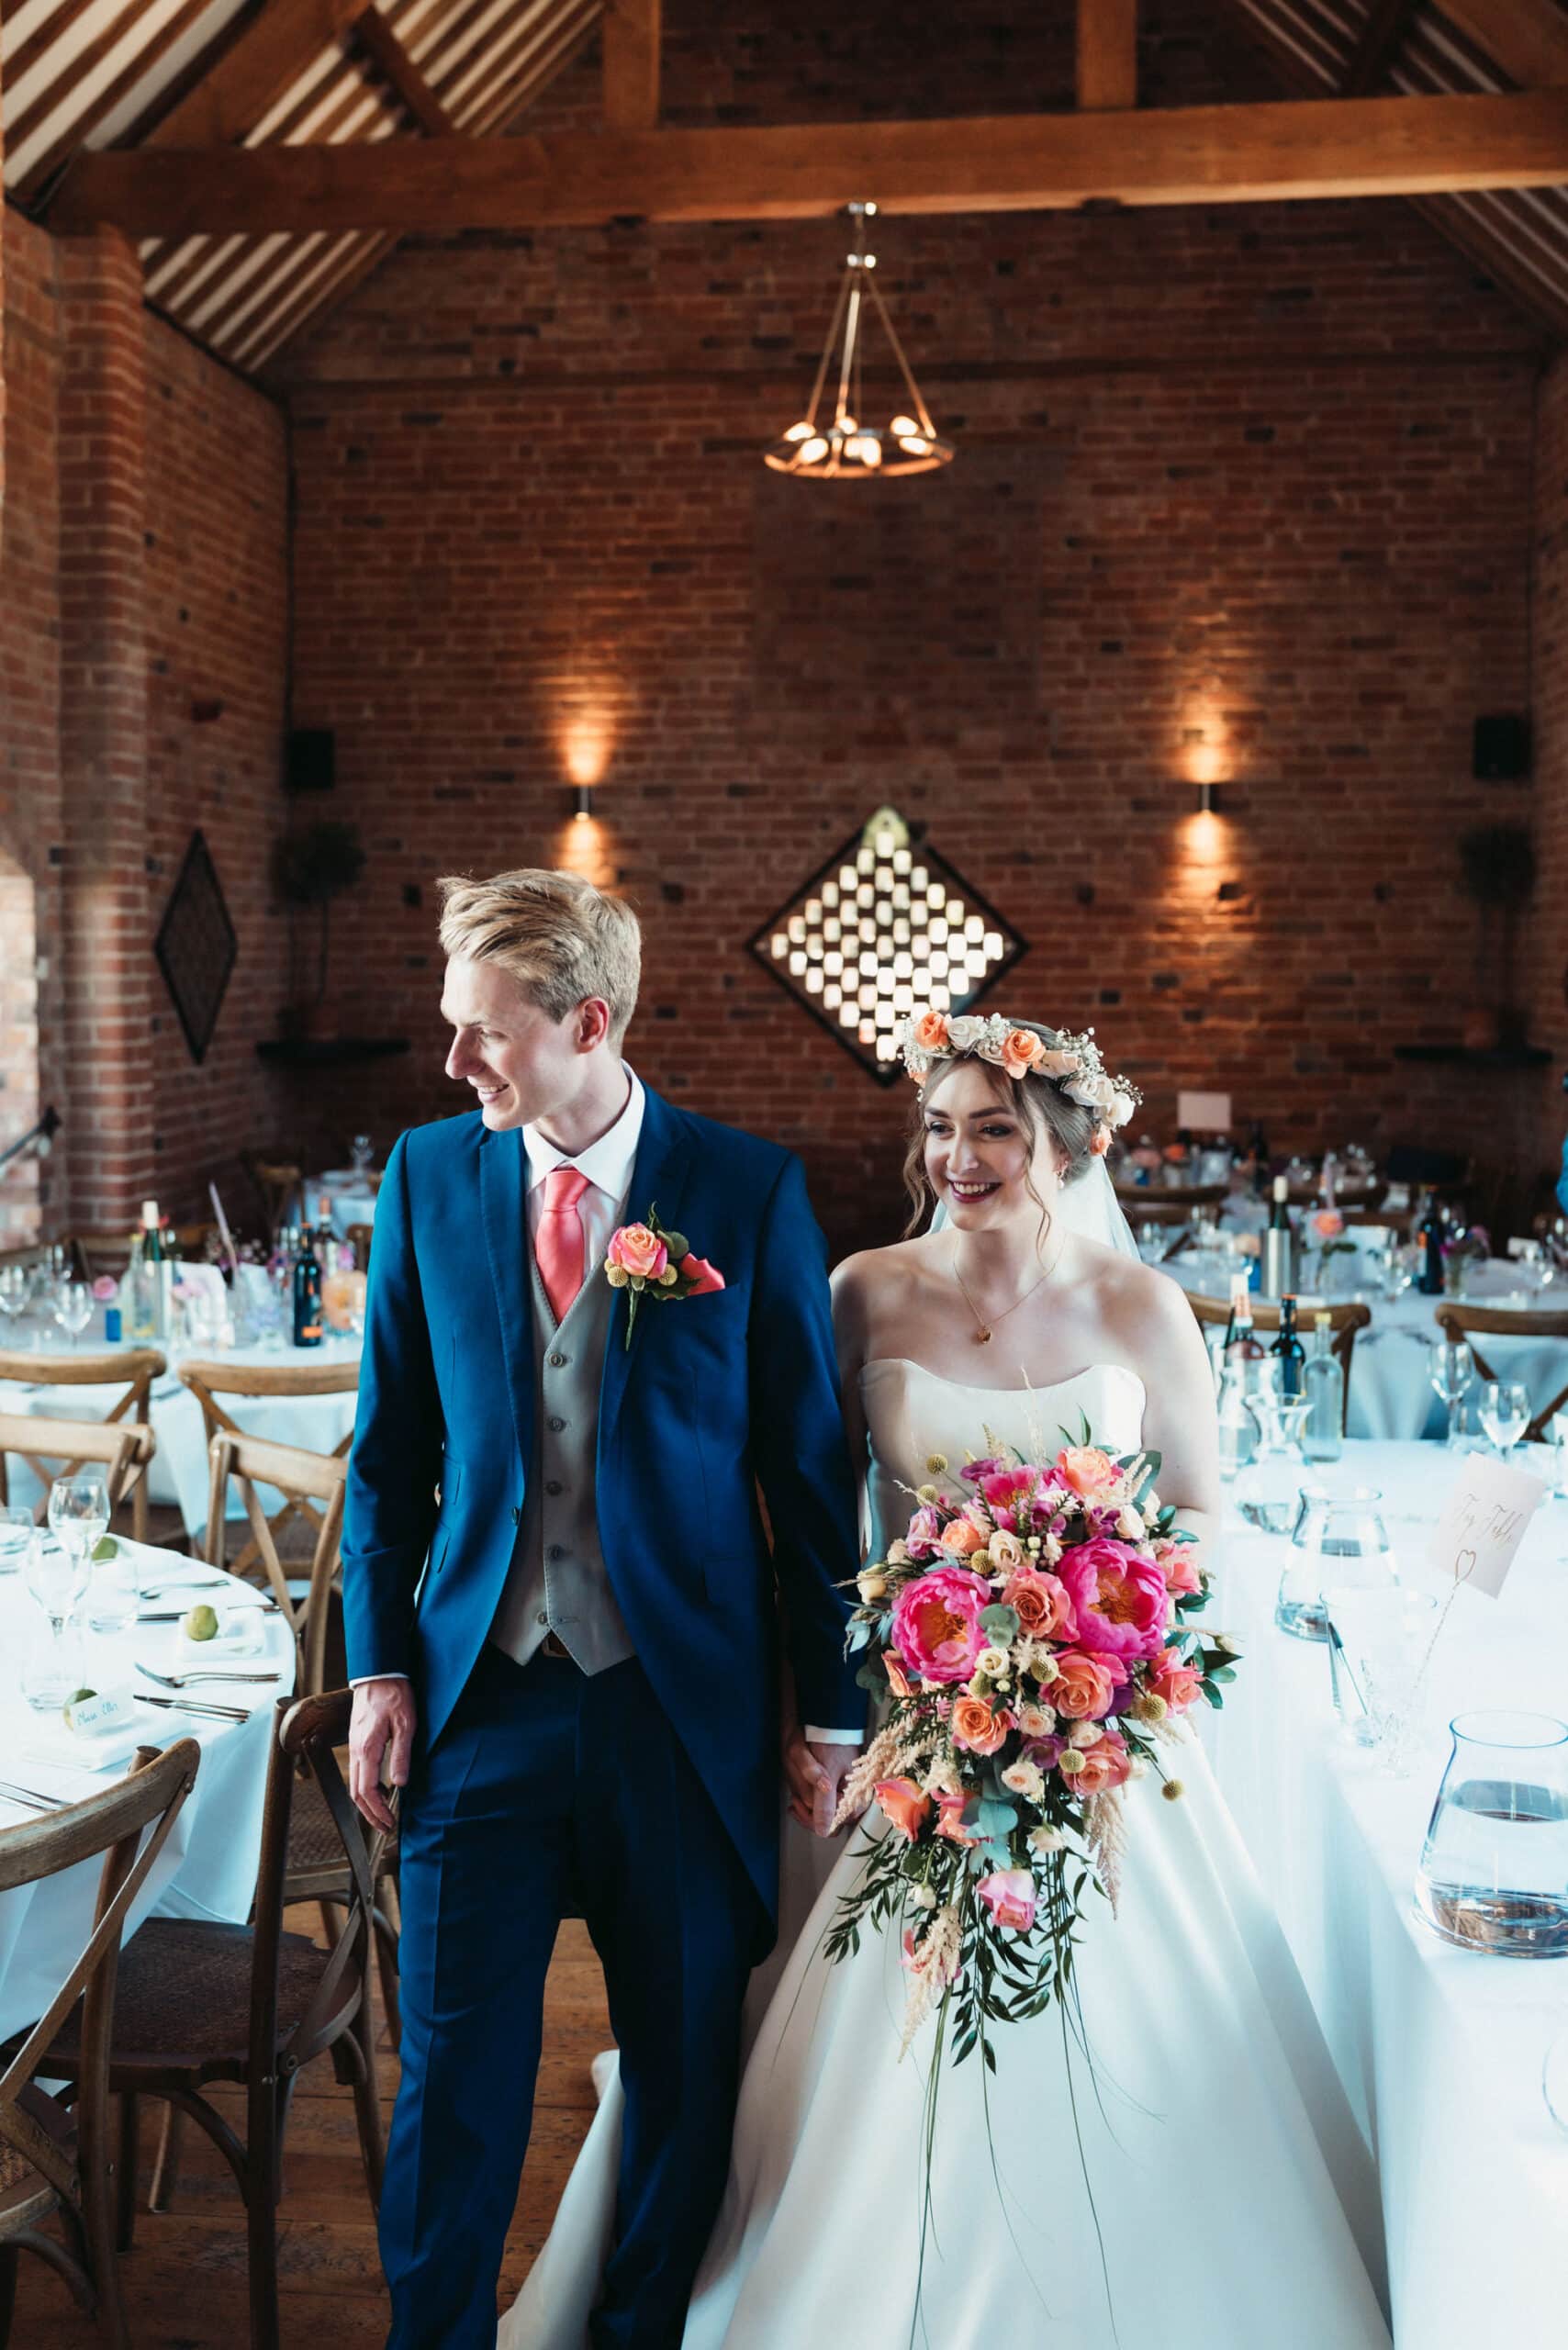 Wedding Photography at Swallows Nest Barn, Warwickshire Wildly in Love